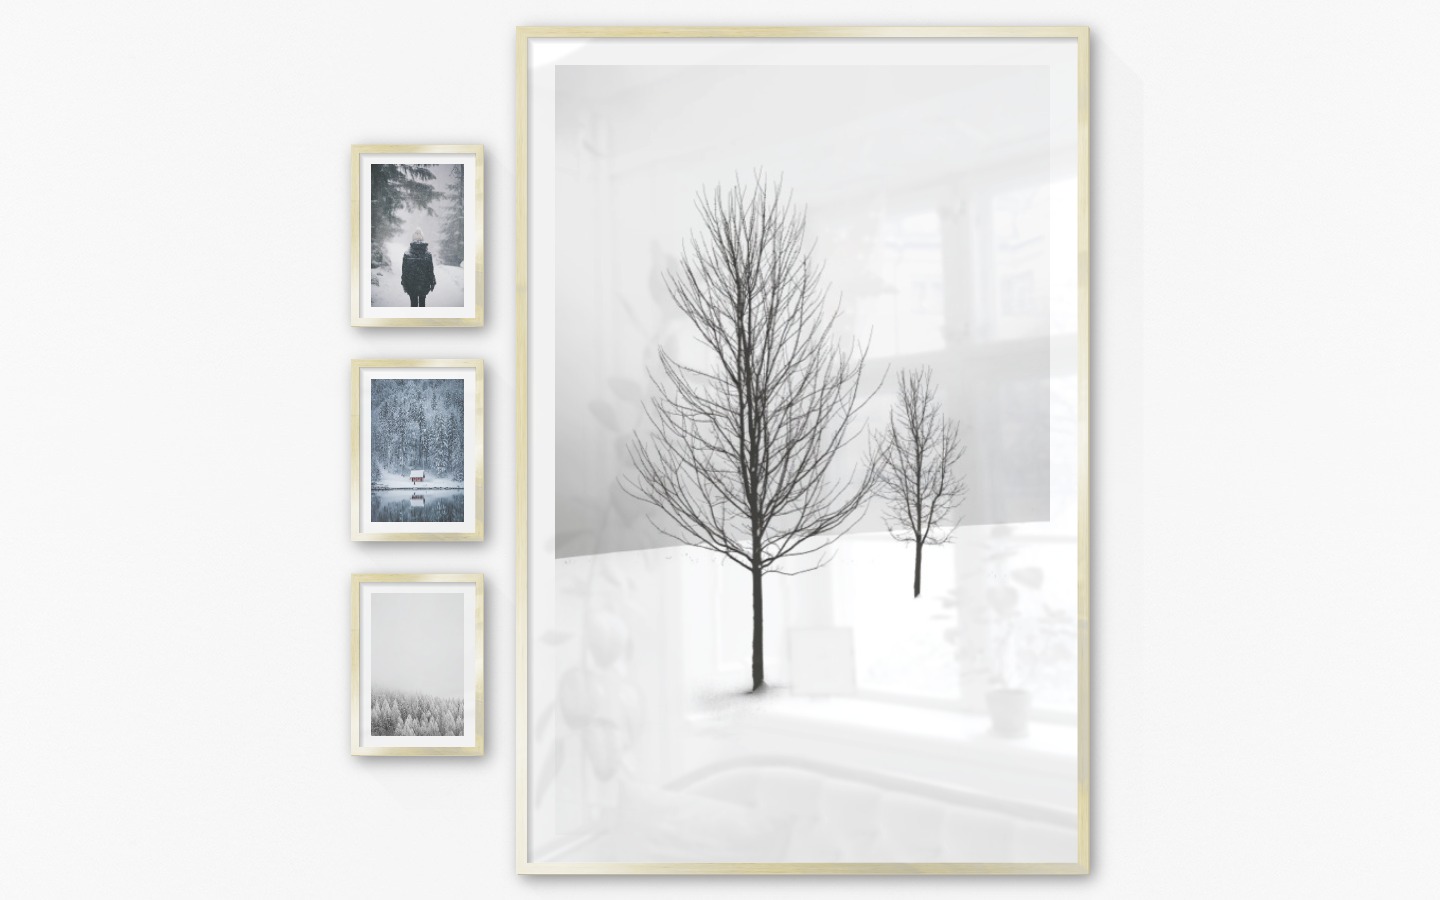 Gallery wall with picture frames in gold in sizes 21x30 and 100x150 with prints "Person in the snow", "Cottage by the lake", "Wooden tops in winter" and "Trees in the snow"